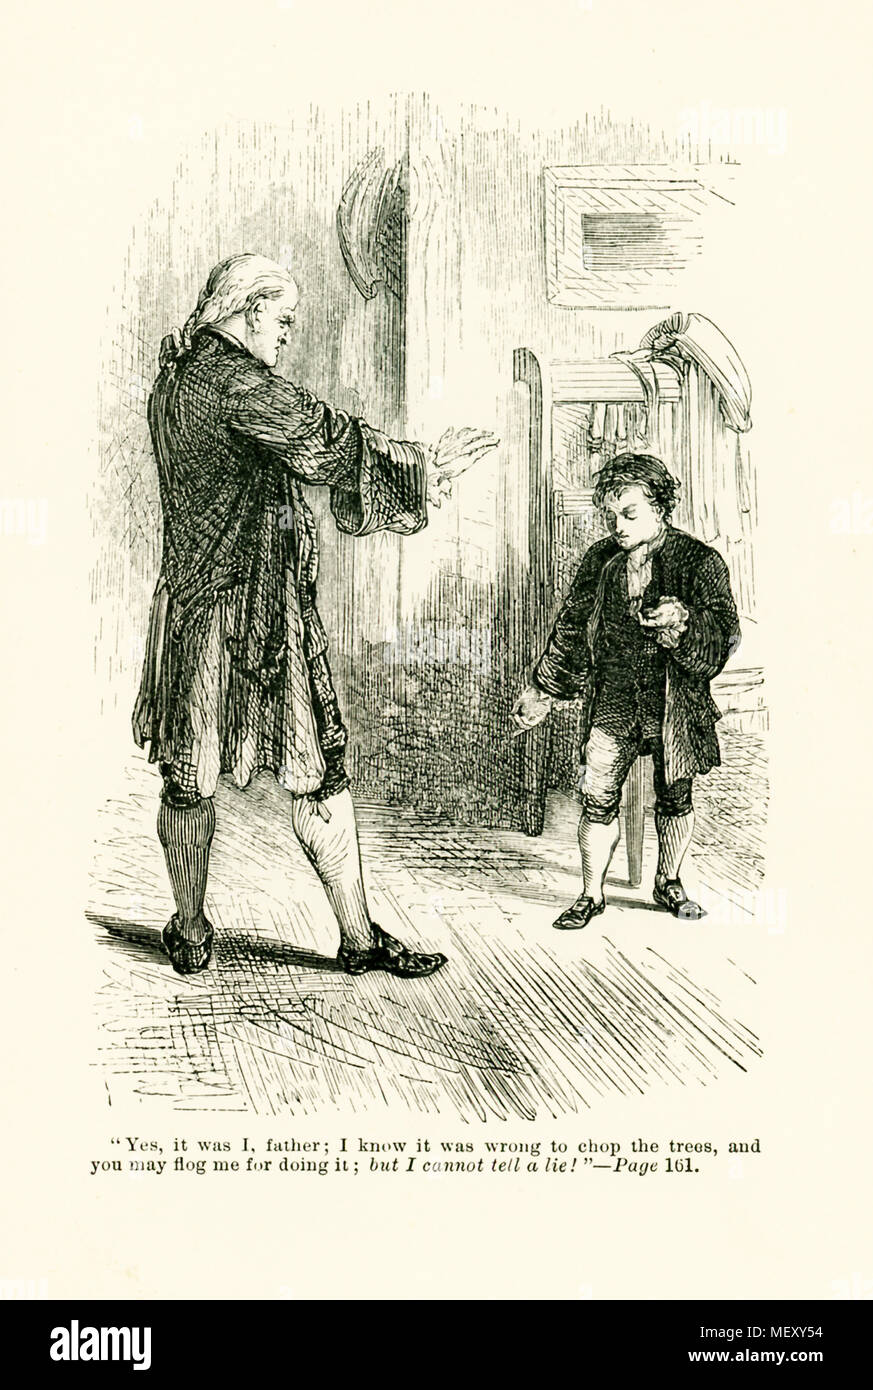 The caption of this illustration that dates to around 1865 reads: Yes, it was I, father; I know it was wrong to chop the tres, and you may flog me for doing it, but I cannot tell a lie. The characters are George washington (right) and his father, and the tale is the incident of young Washingotn chopping down the cherry tree. Stock Photo